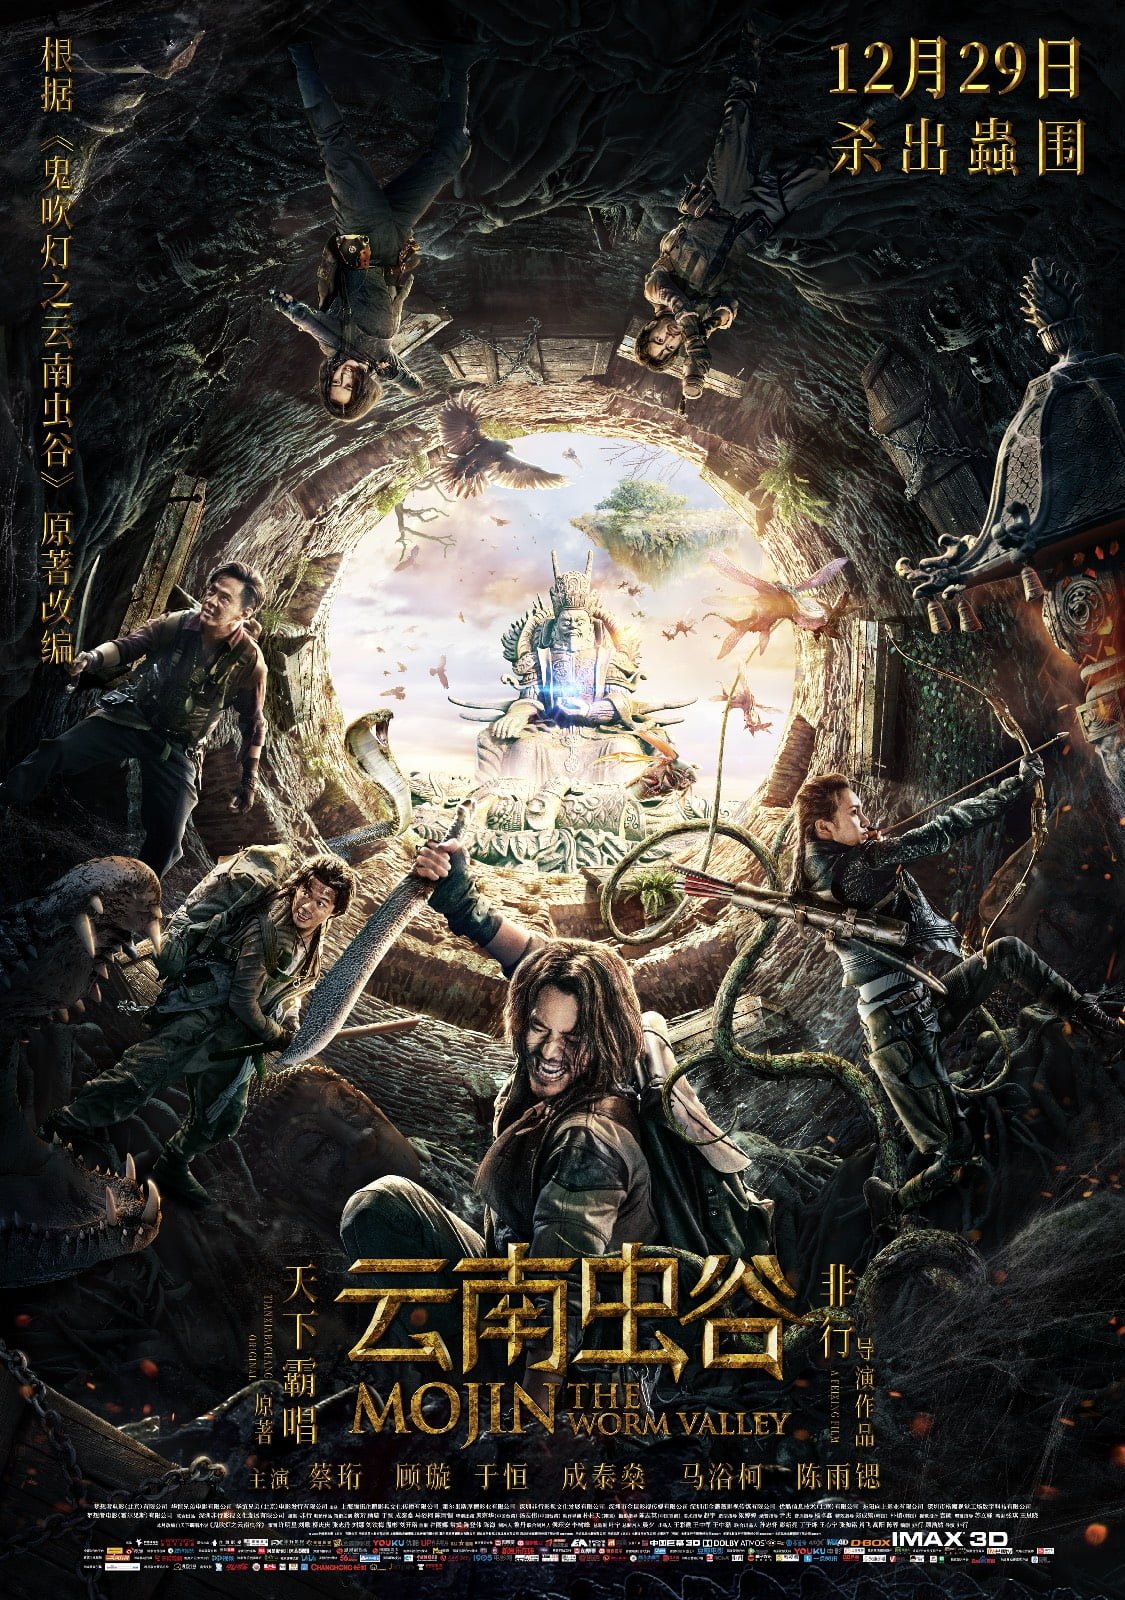 Download Movie: Mojin: The Worm Valley (2018) Chinese Mandarin BluRay Mp4